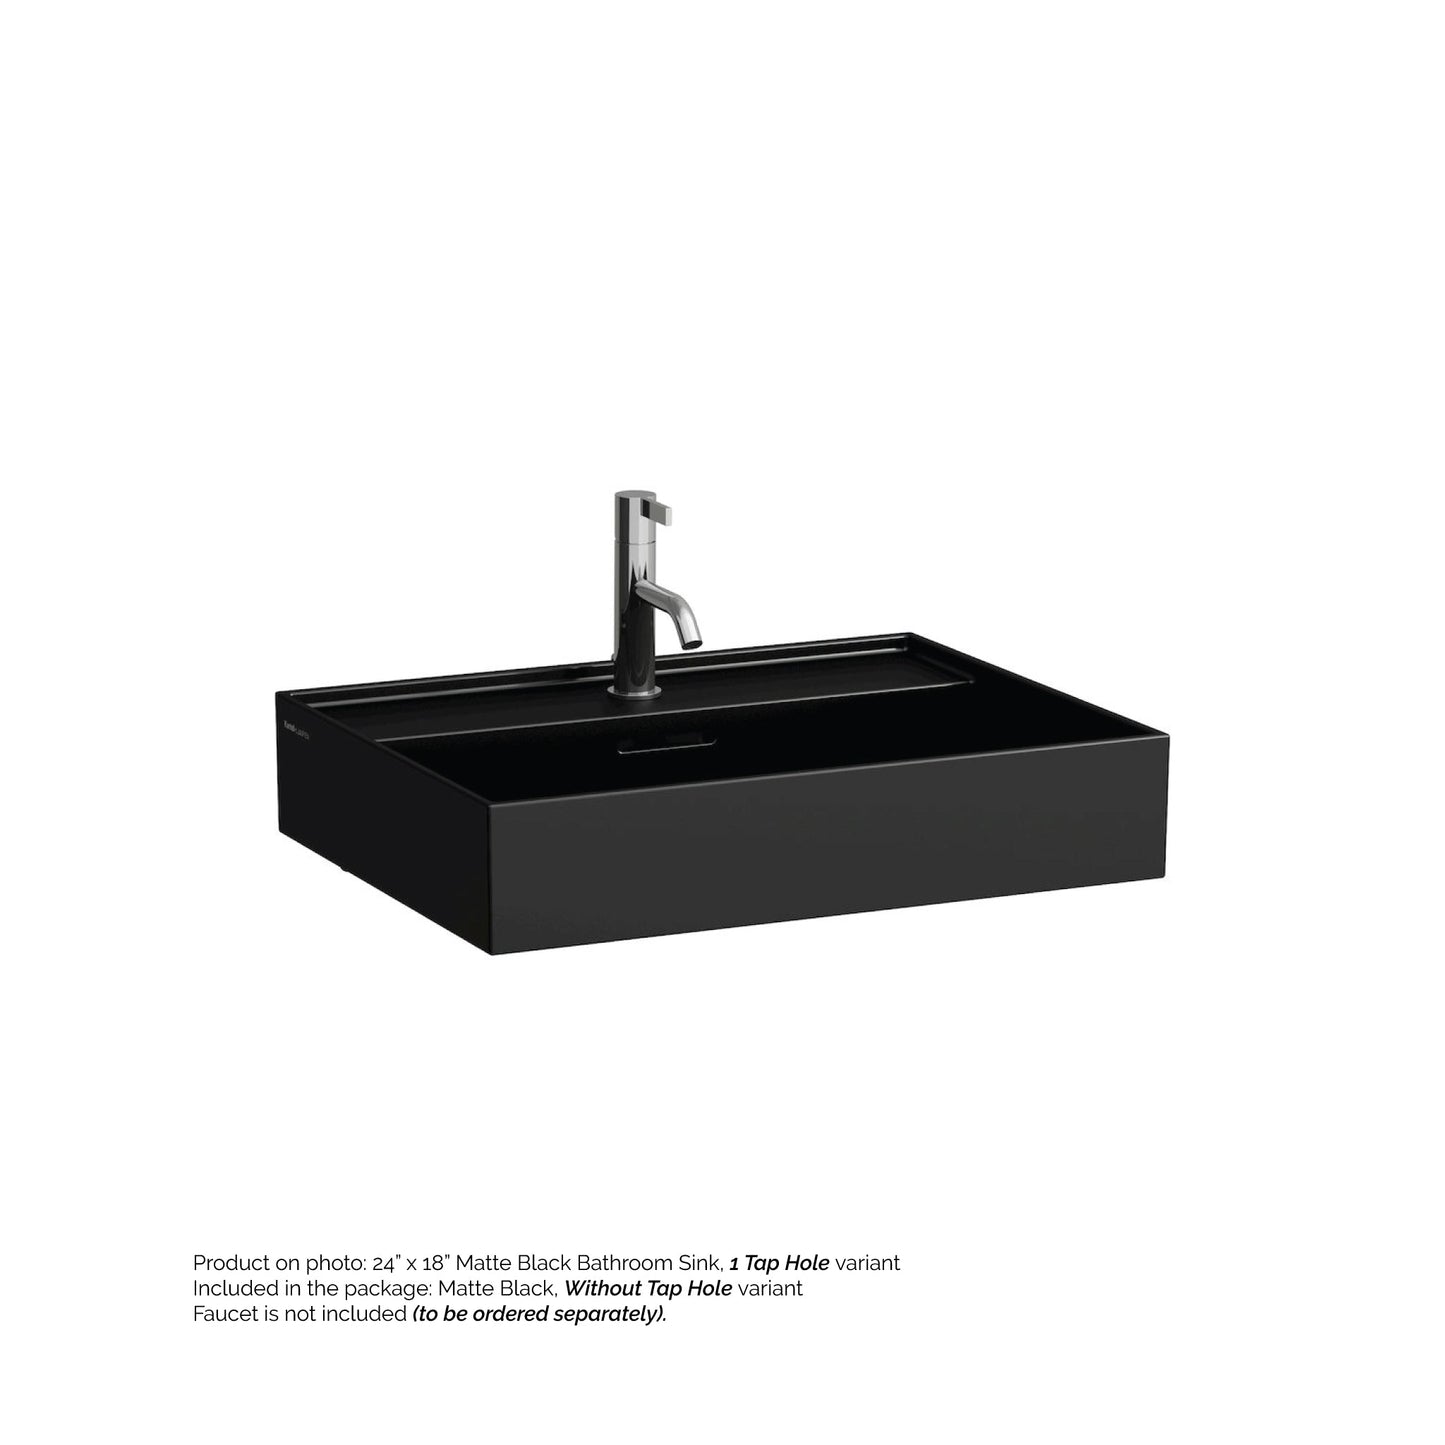 Laufen Kartell 24" x 18" Matte Black Wall-Mounted Bathroom Sink Without Faucet Hole